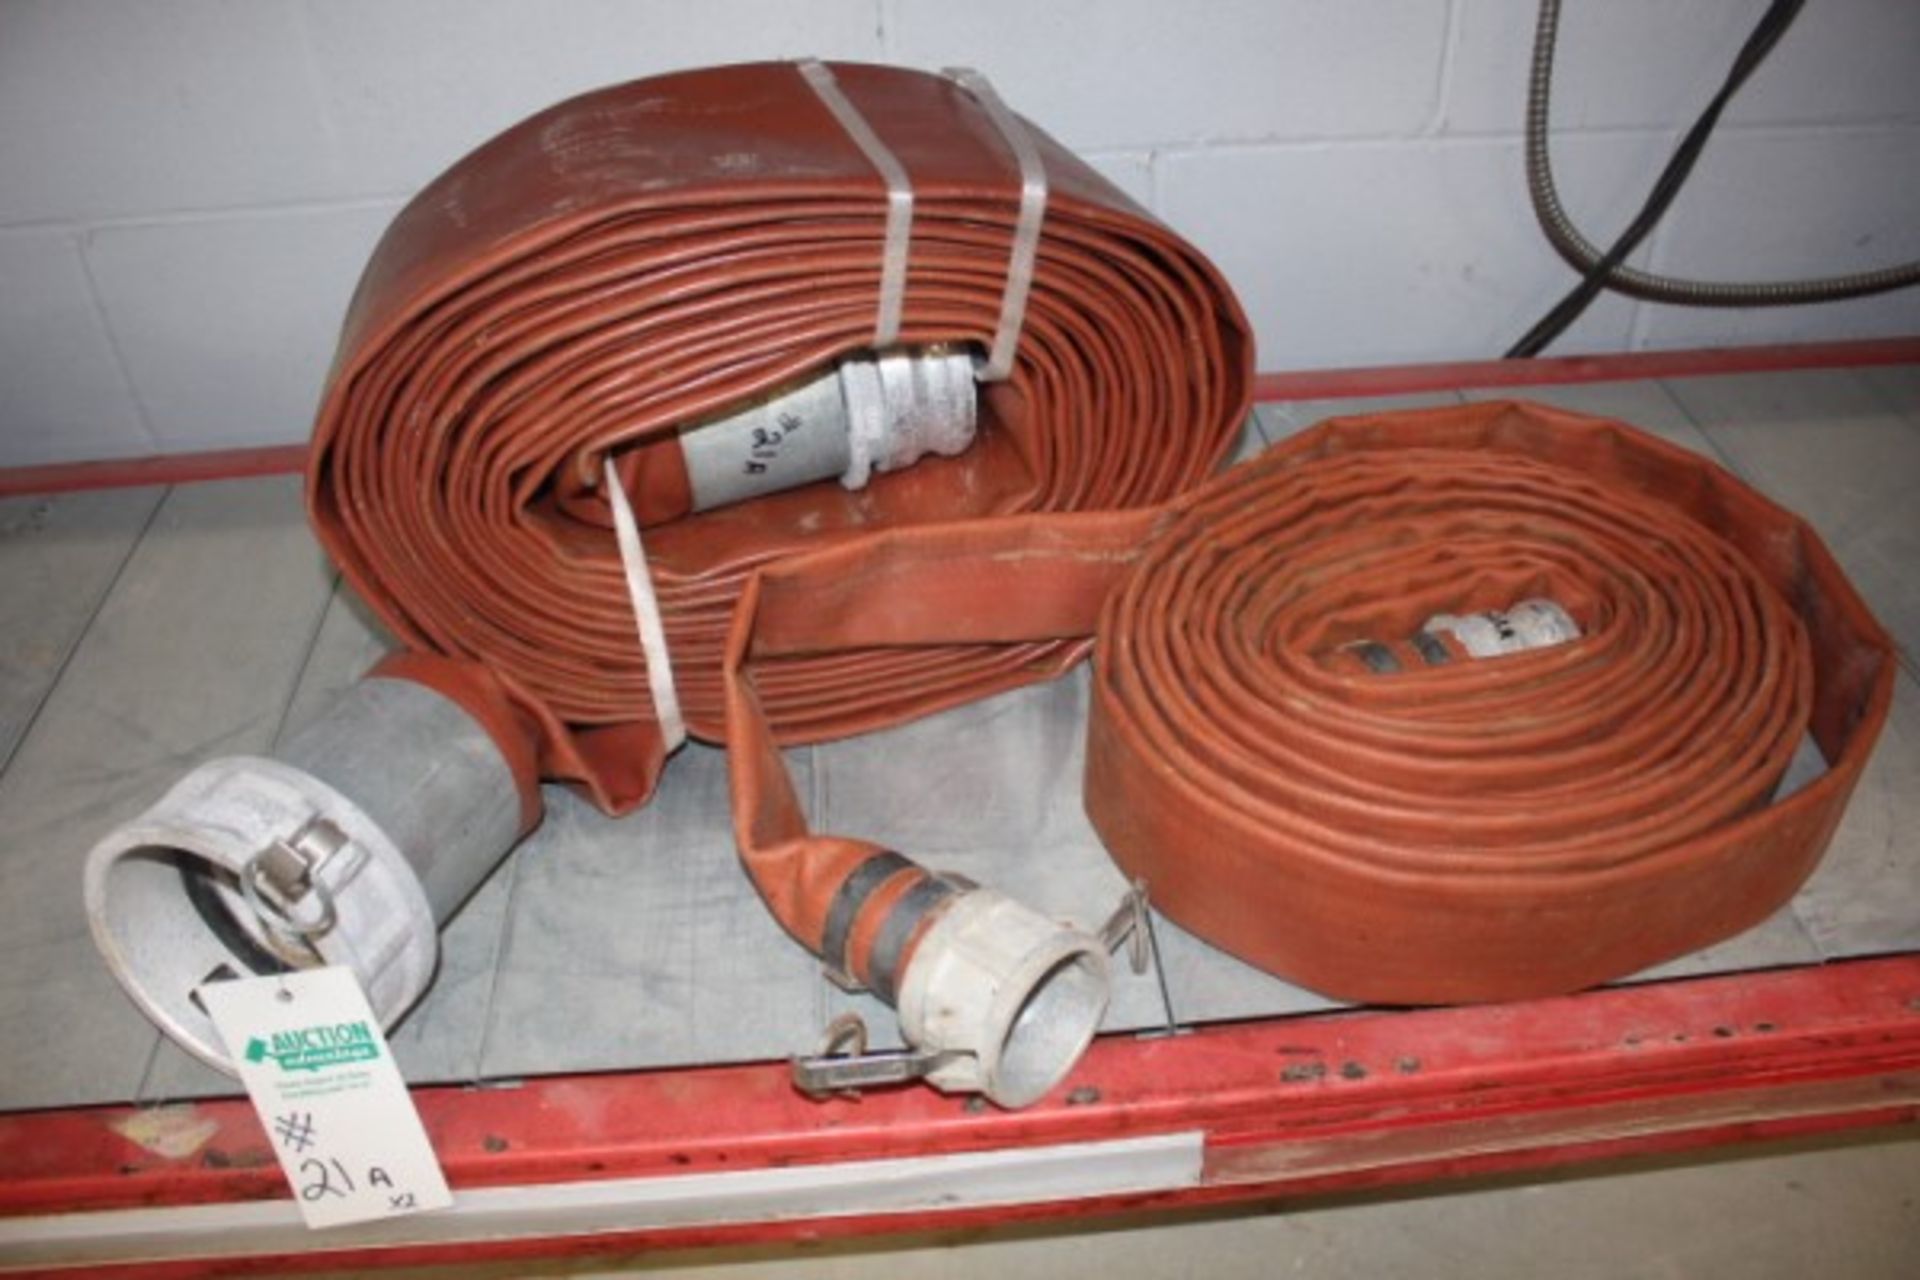 1 X 6" X 50' DISCHARGE HOSE AND 1 X 2" X 50' DISCHARGE HOSE